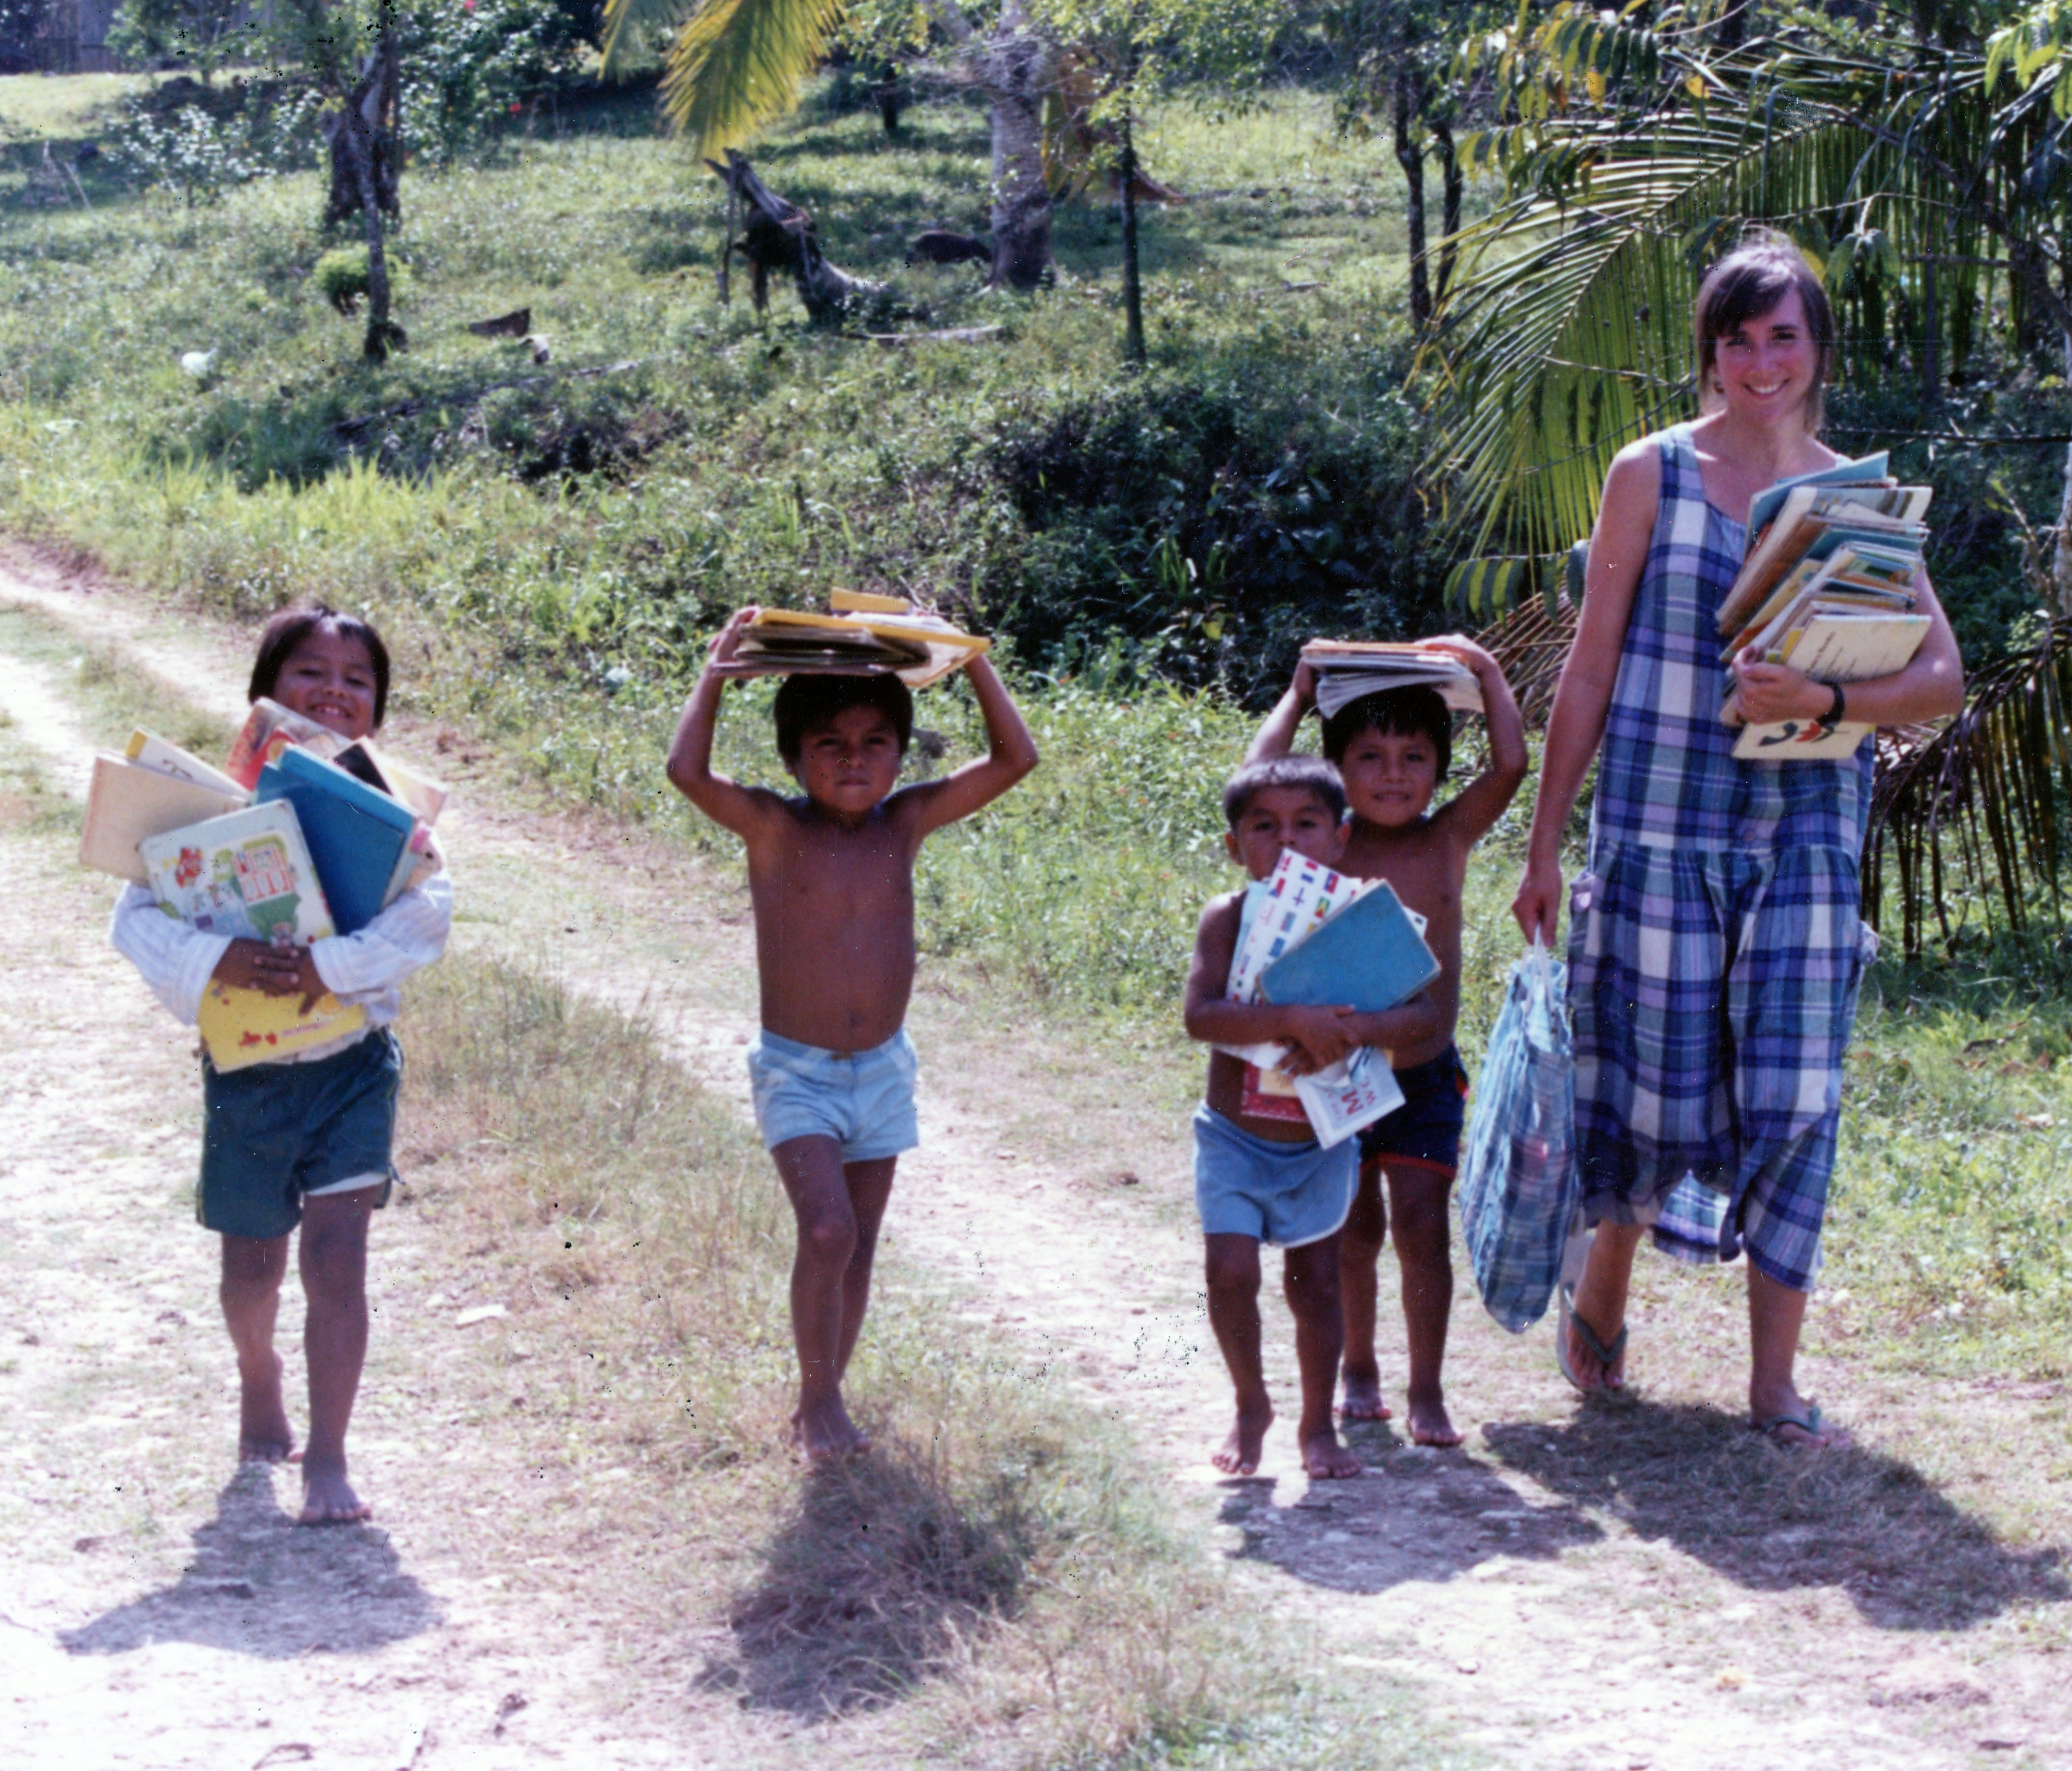 Teacher and small children carrying books